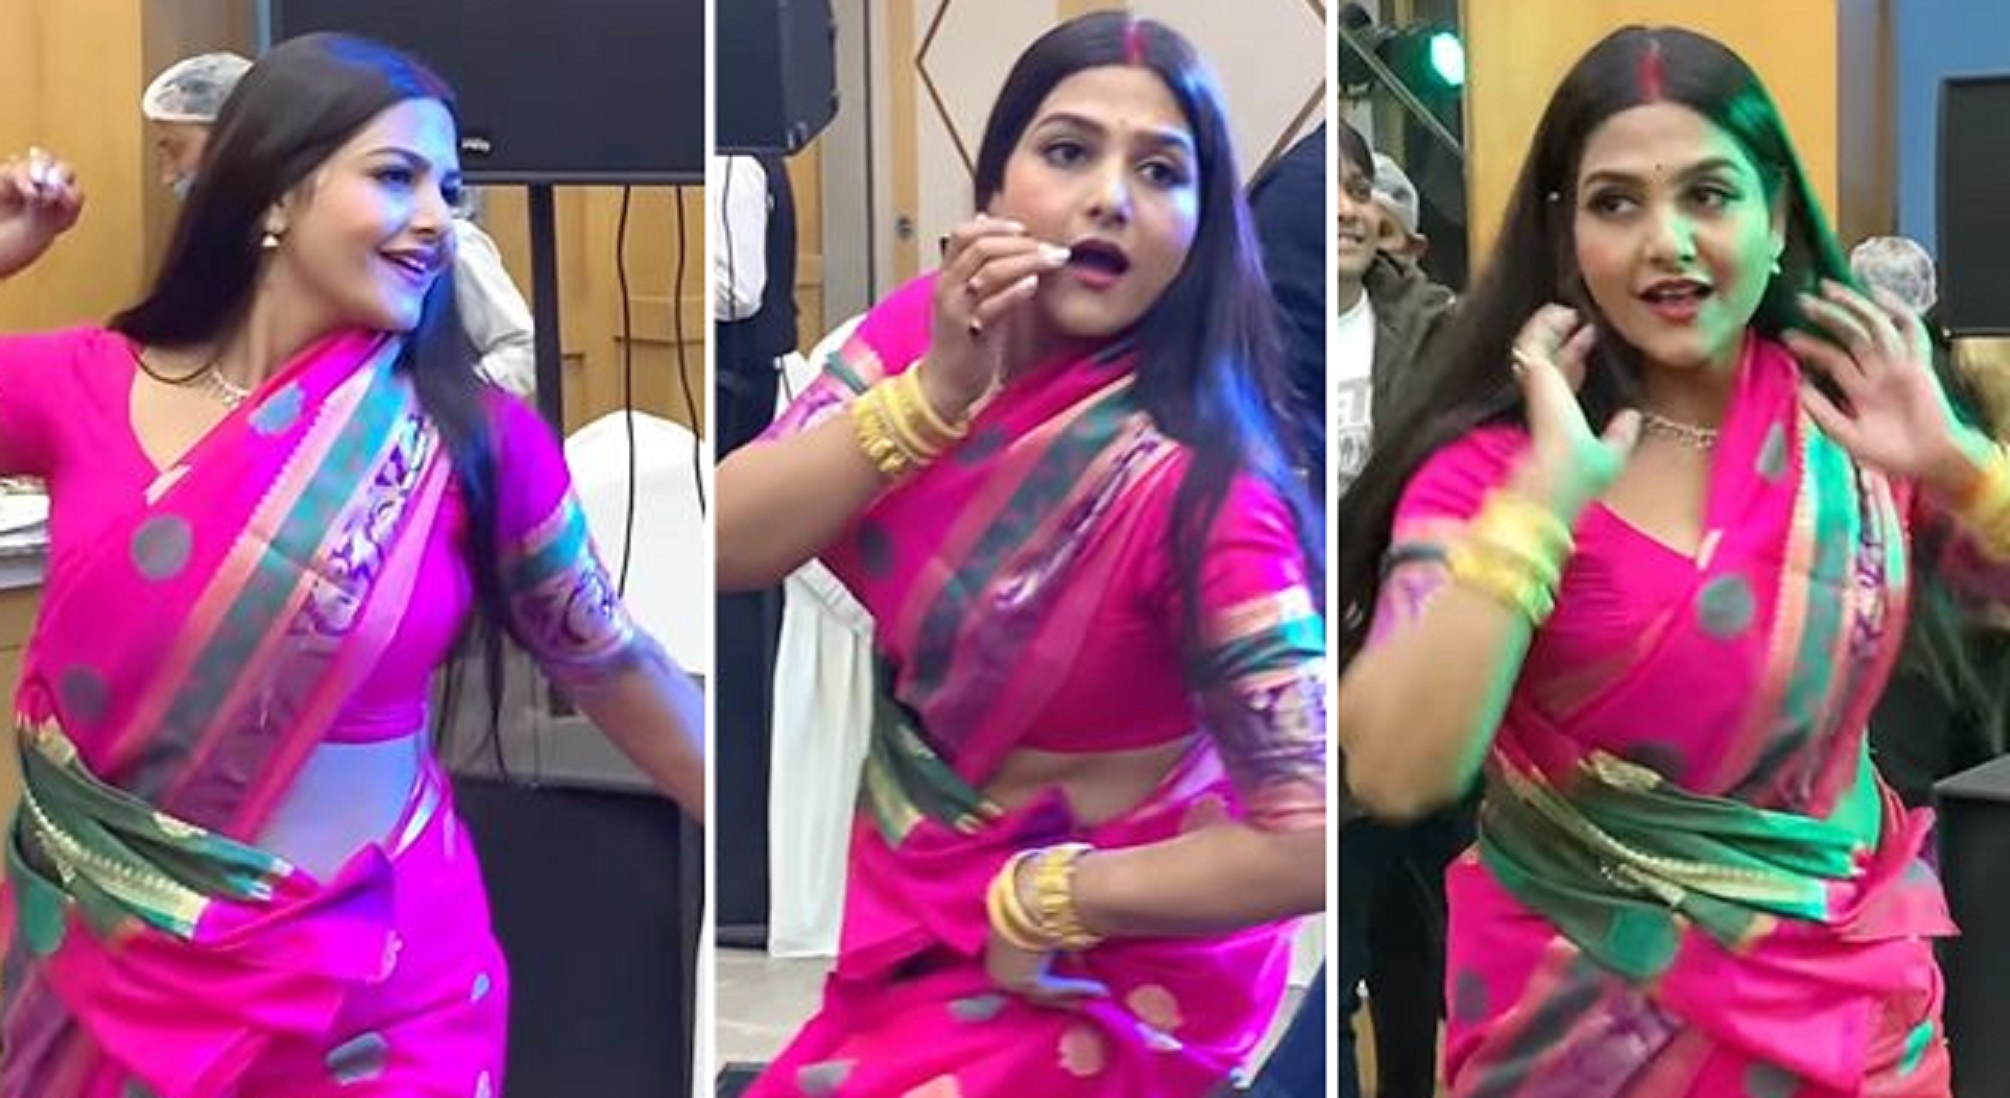 Watch : Desi Bhabhi Dances On Govinda Song In Saree, Sets The Internet On Fire With Her Moves